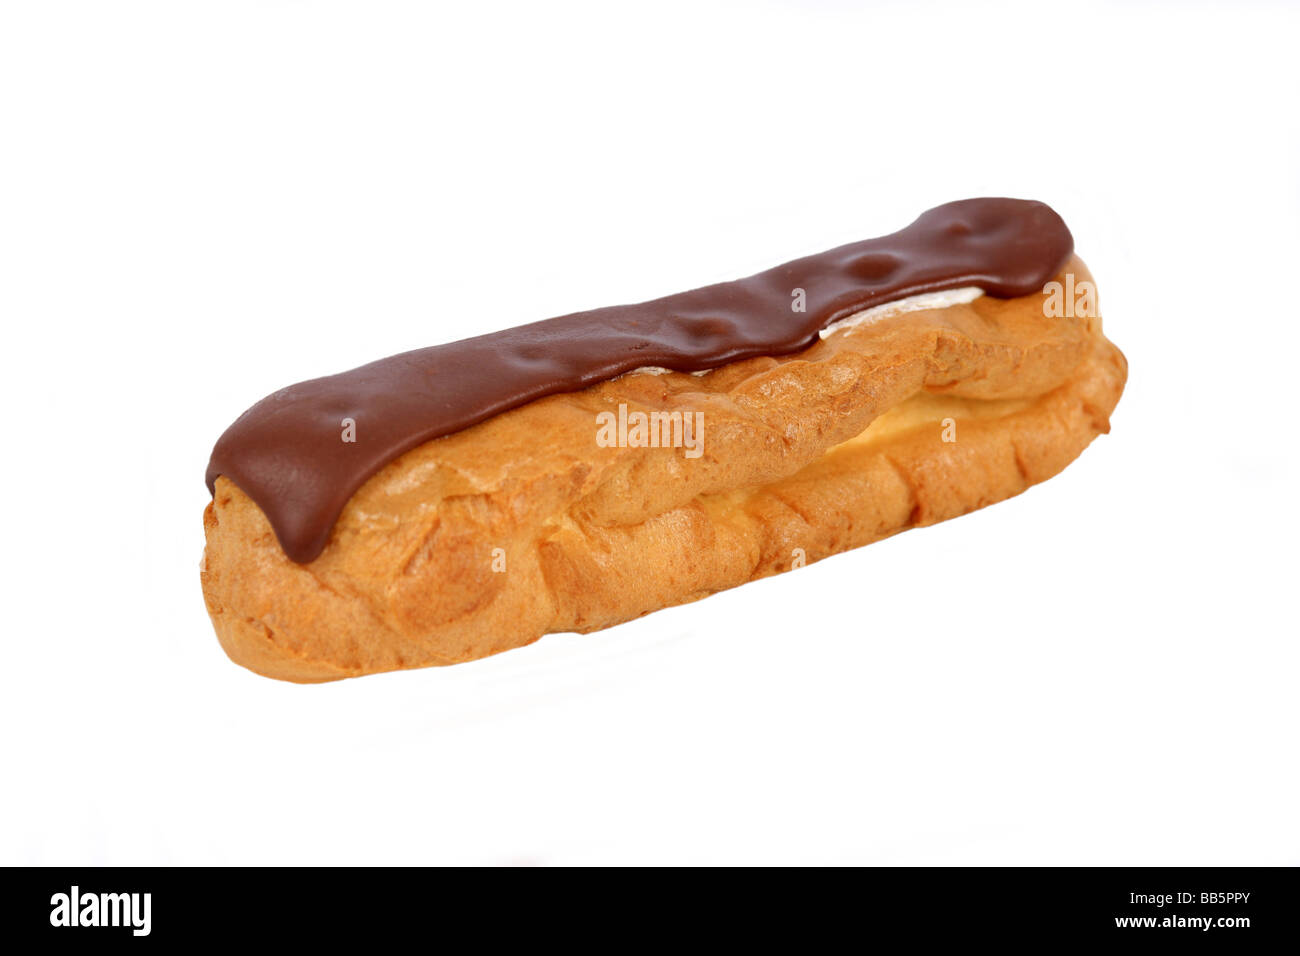 A single Chocolate Eclair against a white background Stock Photo